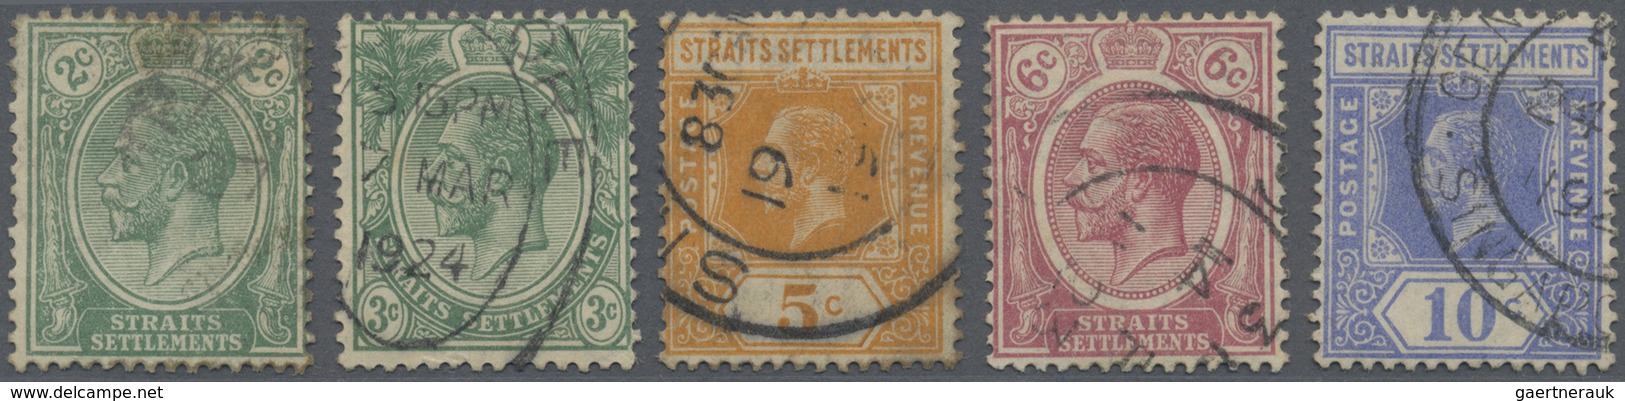 O Malaiische Staaten - Straits Settlements: 1921/1923, KGV Definitives Five Different Stamps With INVE - Straits Settlements